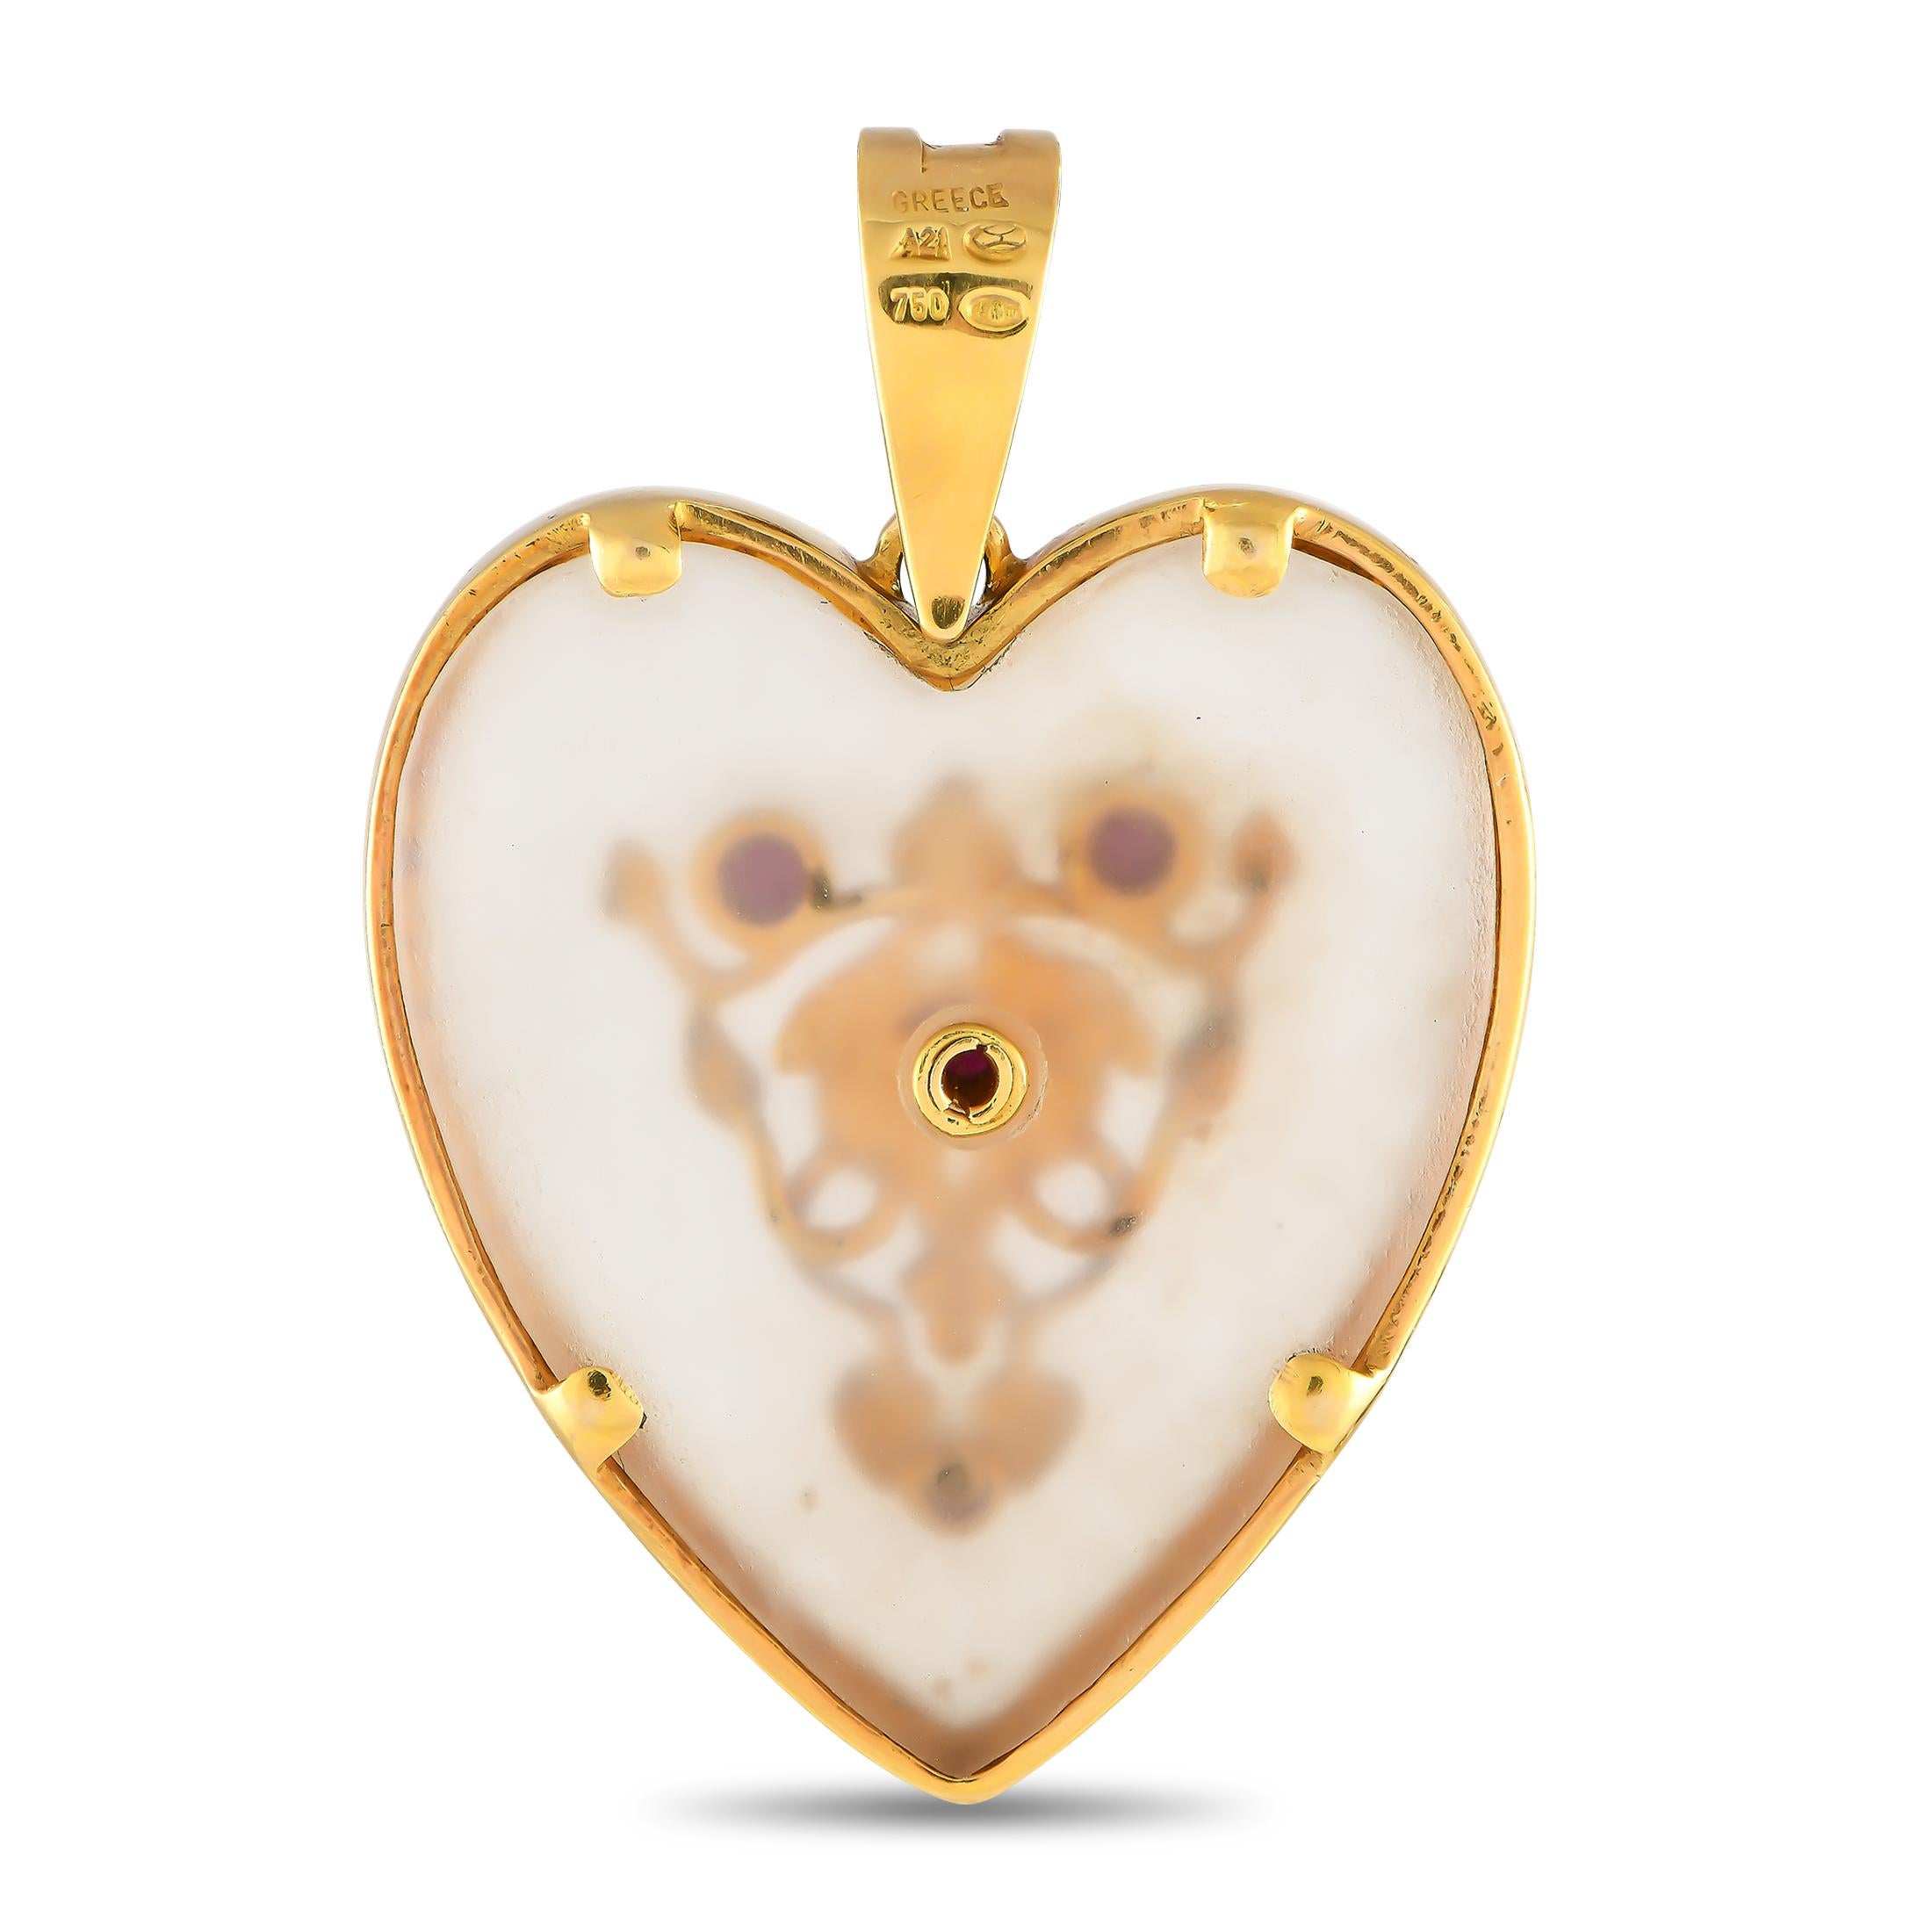 Not to miss is this exquisite creation by world-renowned Greek goldsmith, Ilias Lalaounis. This heart-shaped pendant features a matte rock crystal quartz framed in 18K yellow gold. At the heart's center is a decorative pattern punctuated by